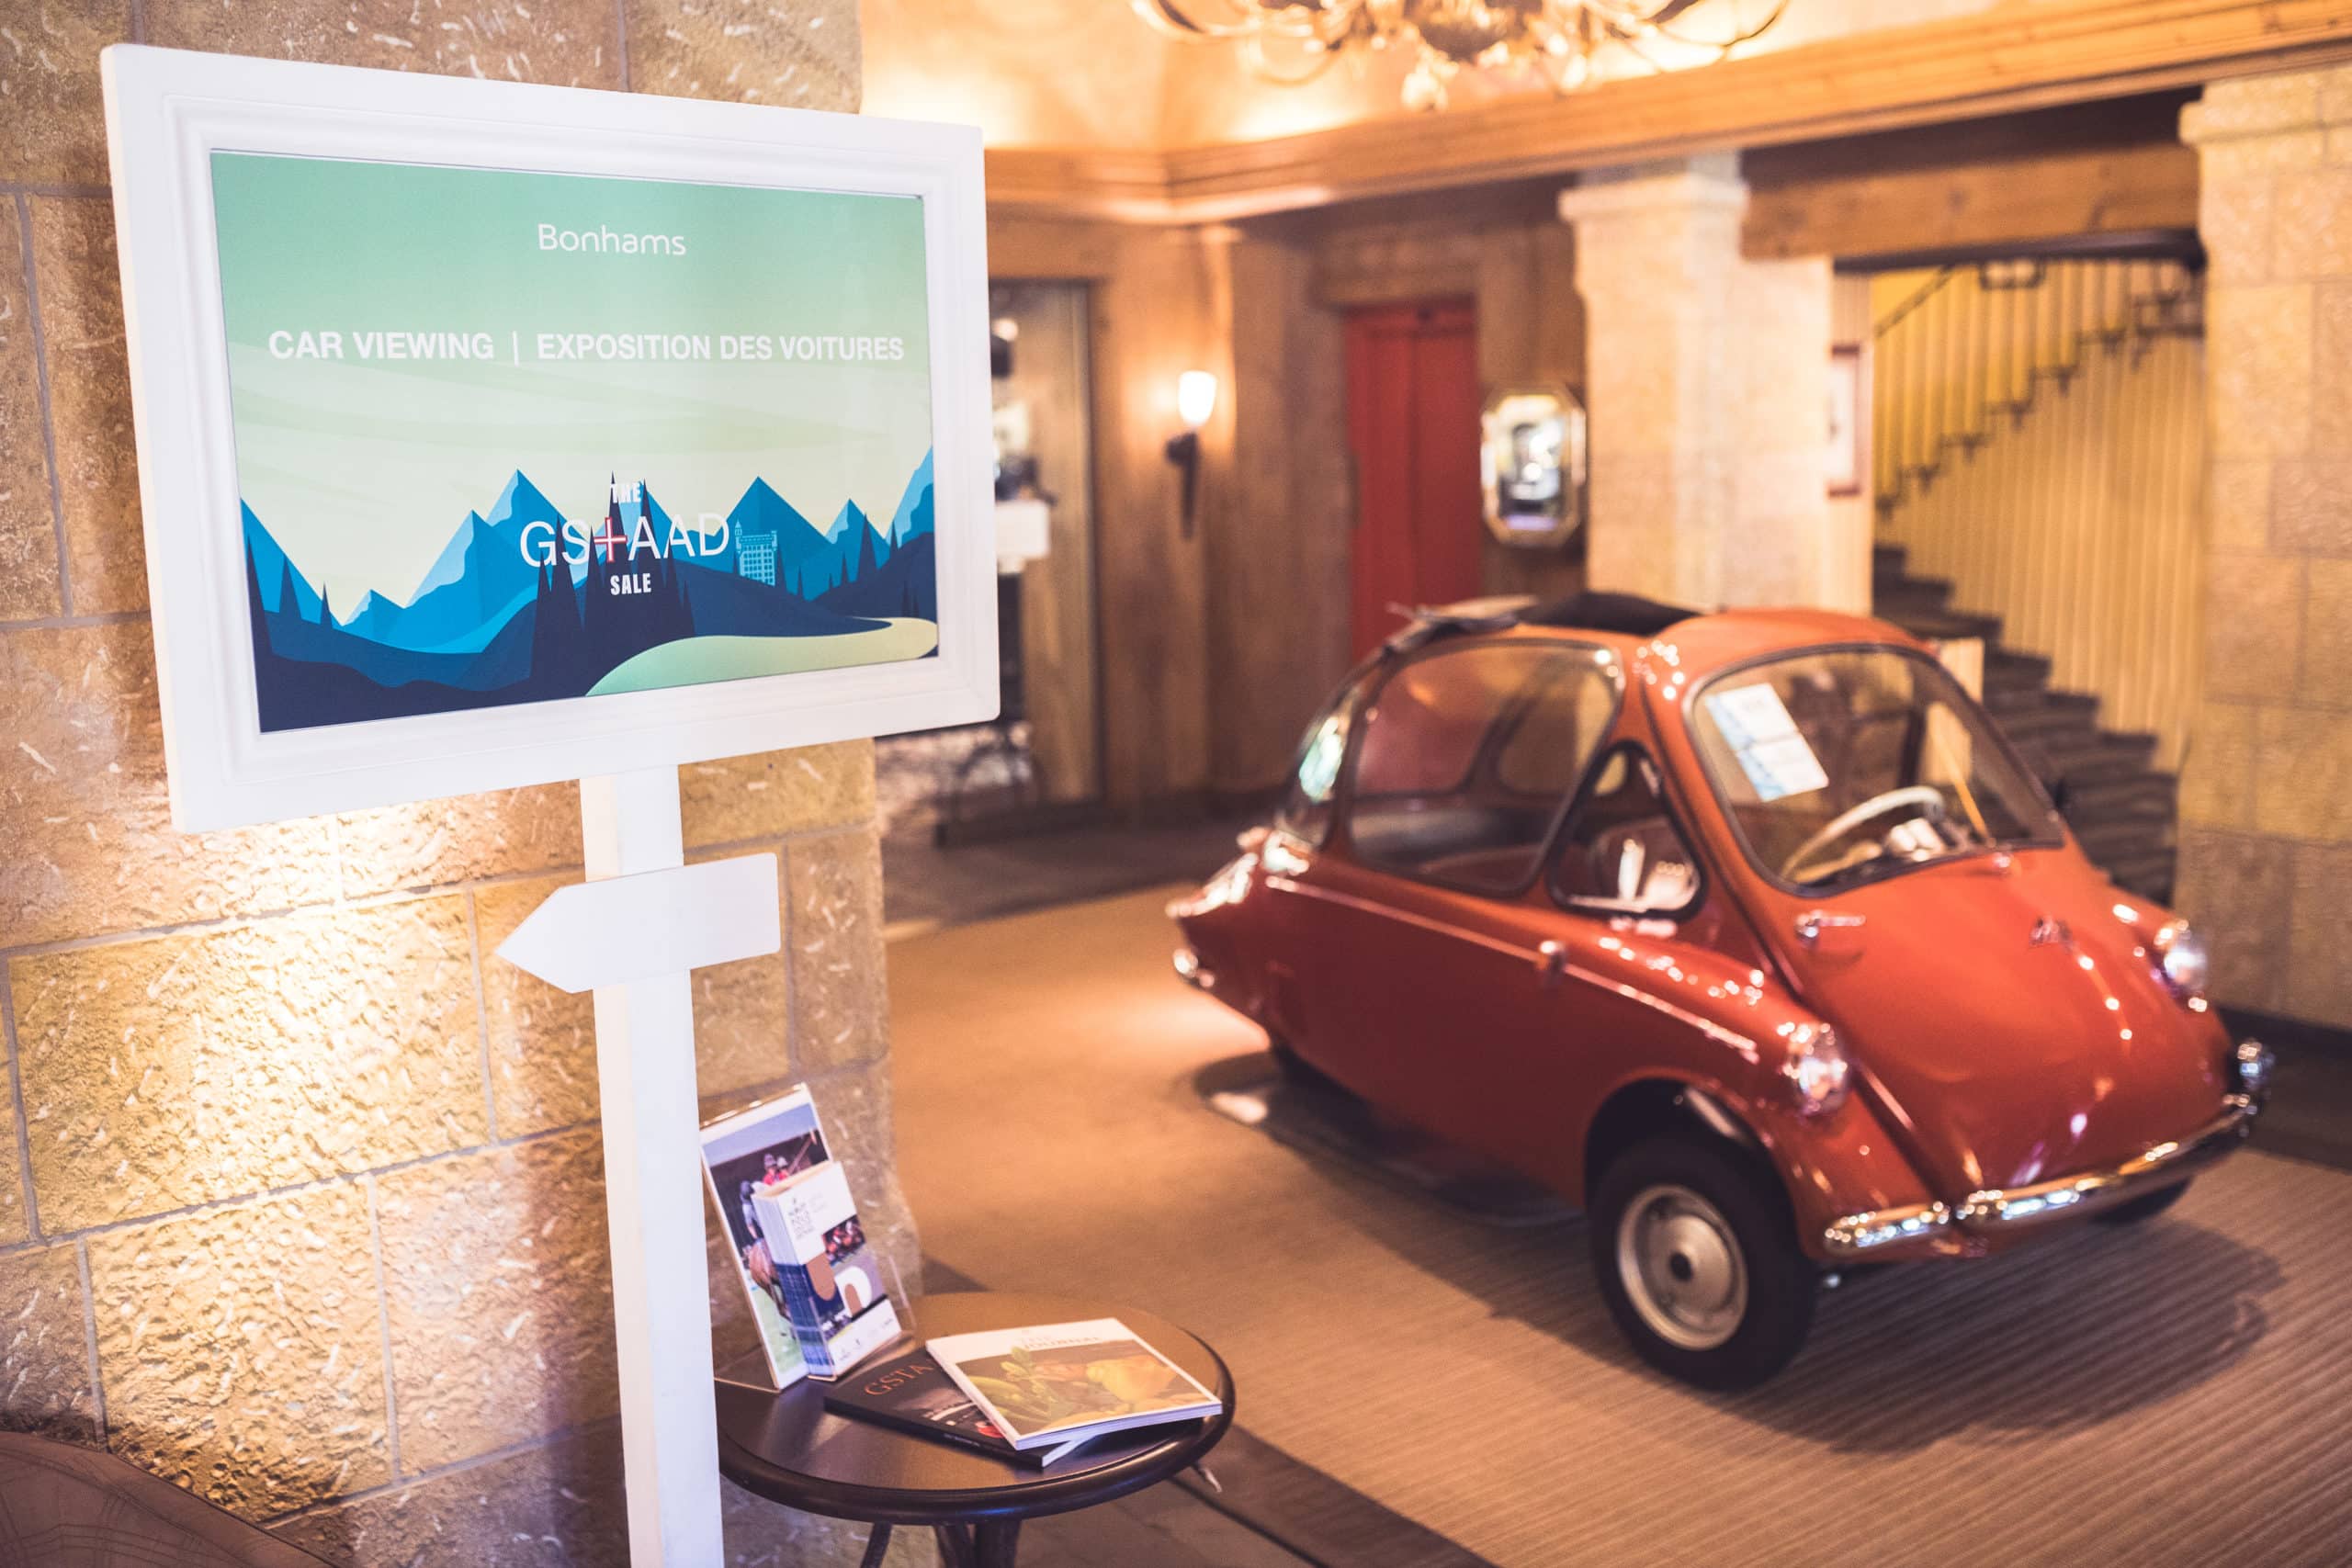 FGP Swiss & Alps l Forbes Global Properties Partnership with the world-famous Bonhams car auction in Gstaad